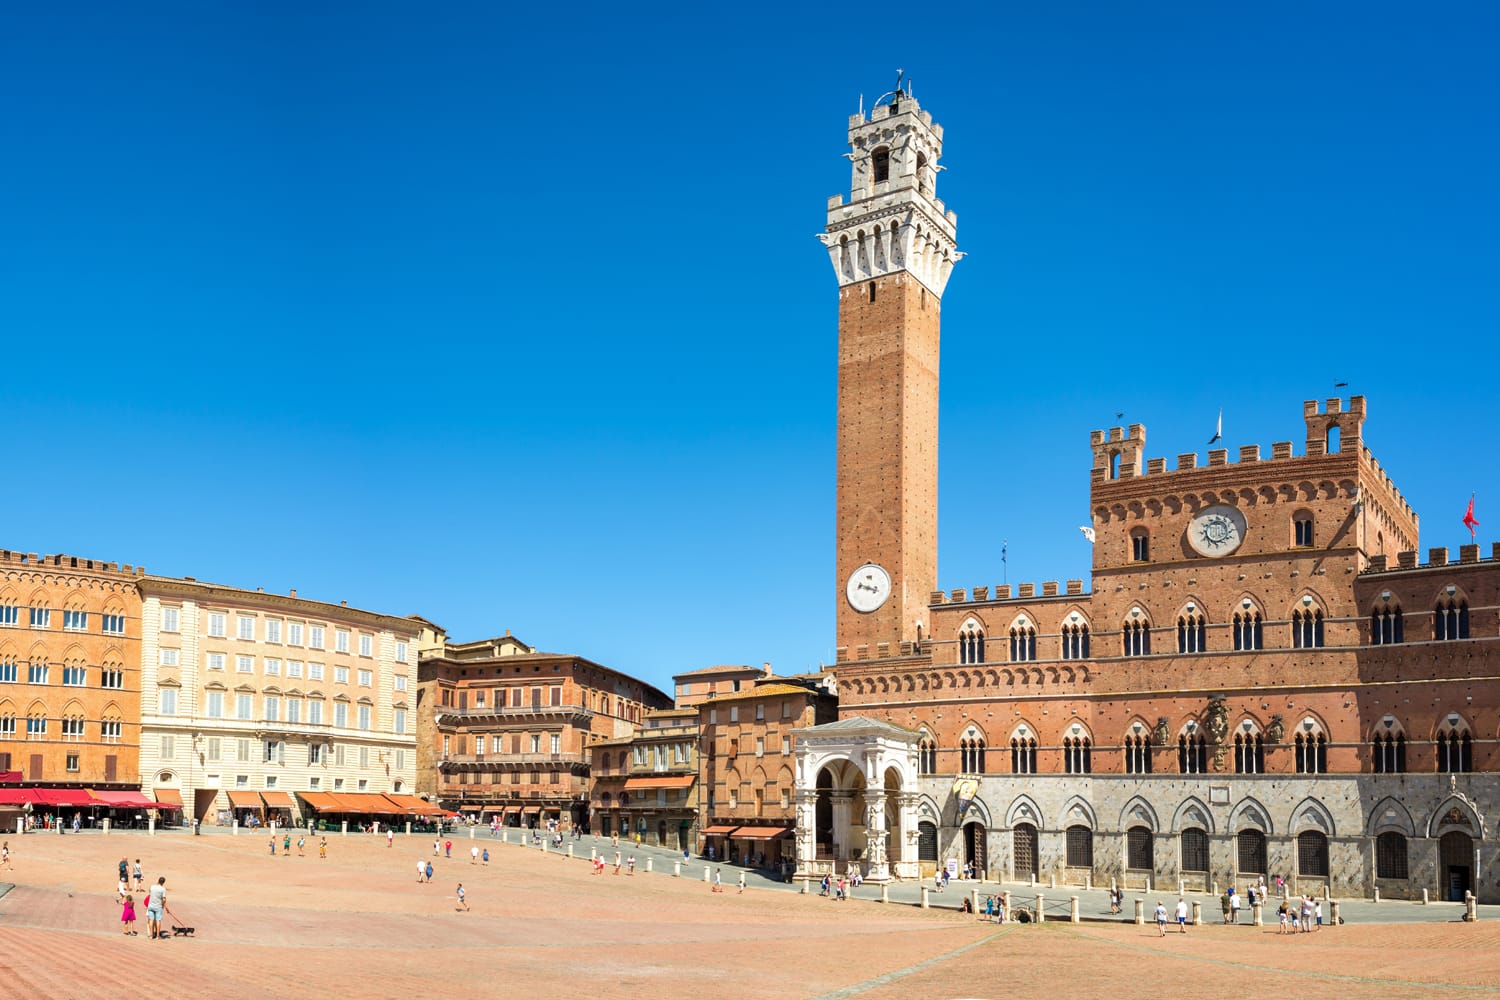 Panorama of Piazza del Campo (Campo square), Palazzo Publico and Torre del Mangia (Mangia tower) in Siena, Tuscany, Italy